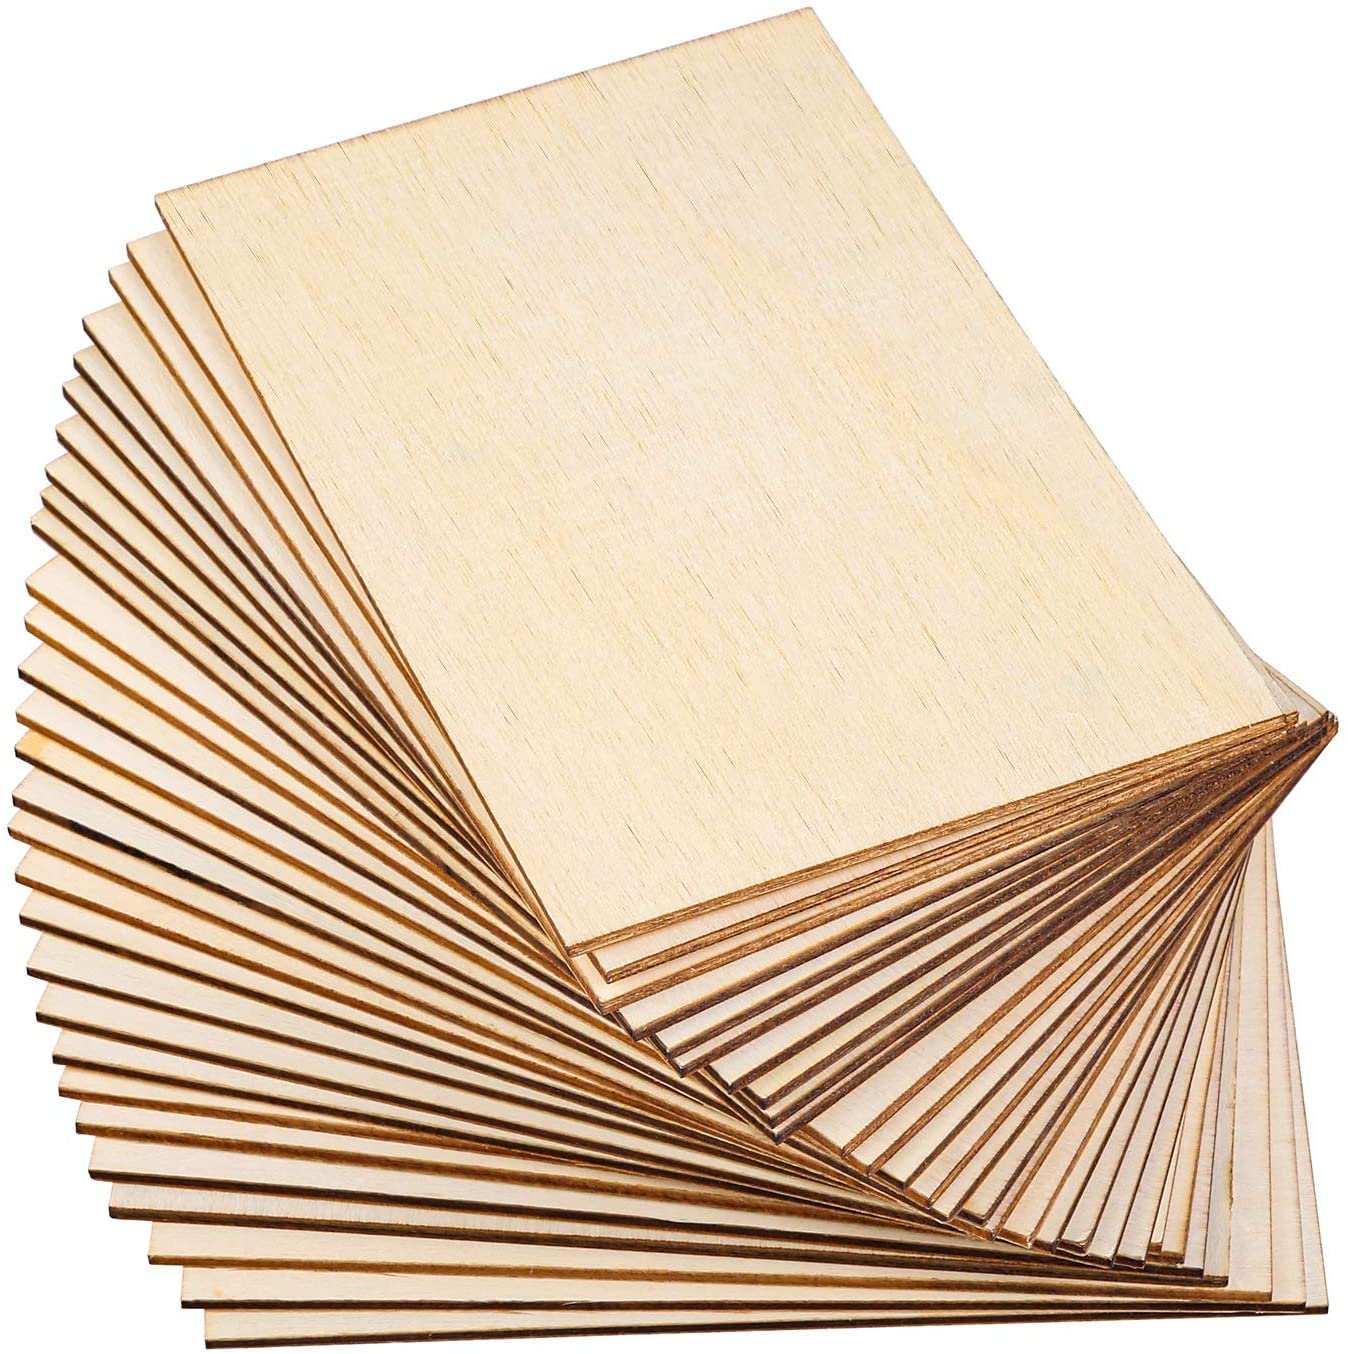 SIWUCHYE Unfinished Wood, 15 Pack Basswood Sheets for Crafts, Craft Wood Board for House Aircraft Ship Boat Arts and Crafts, School Projects, Wooden